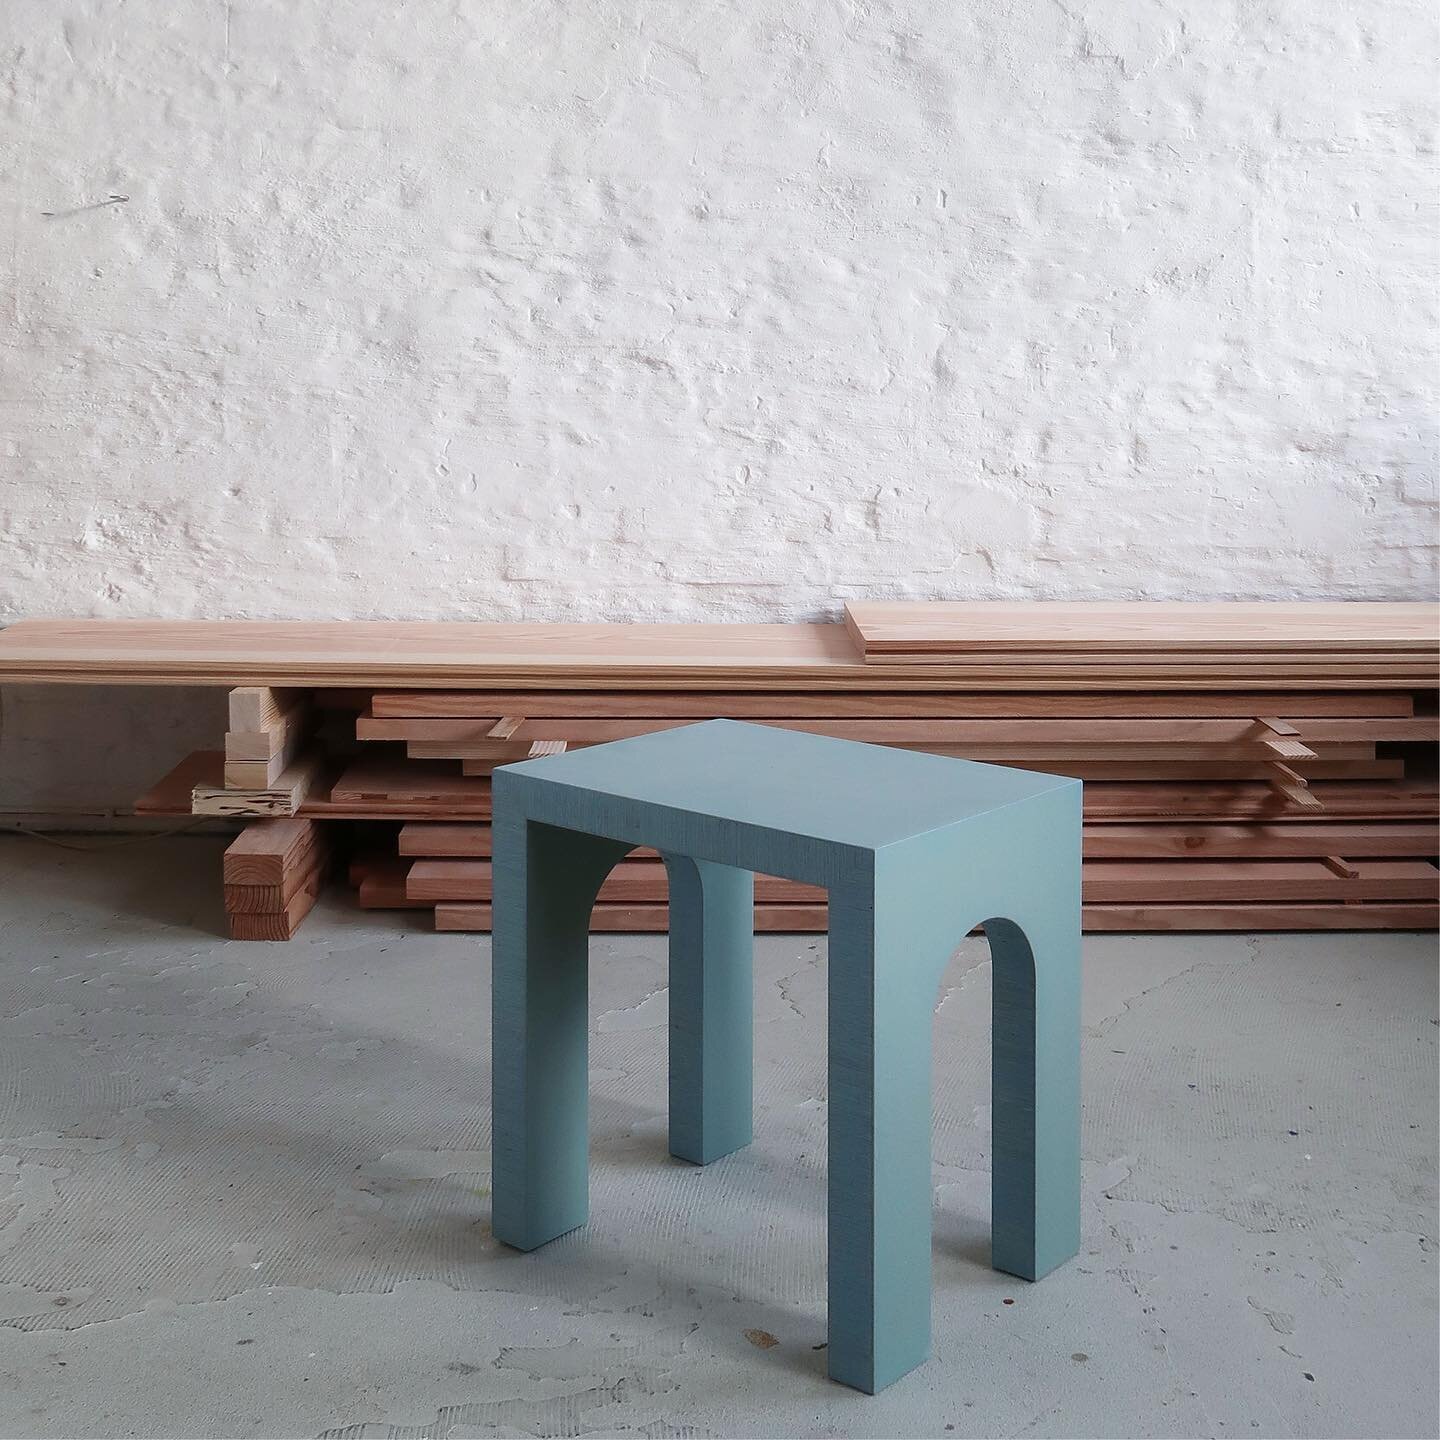 This one of a kind color sample is for sale - half moon stool in light blue. 

DM if interested 

Dimensions: 42 cm high, 36 cm long, 28 cm wide
Price: 2500 kr